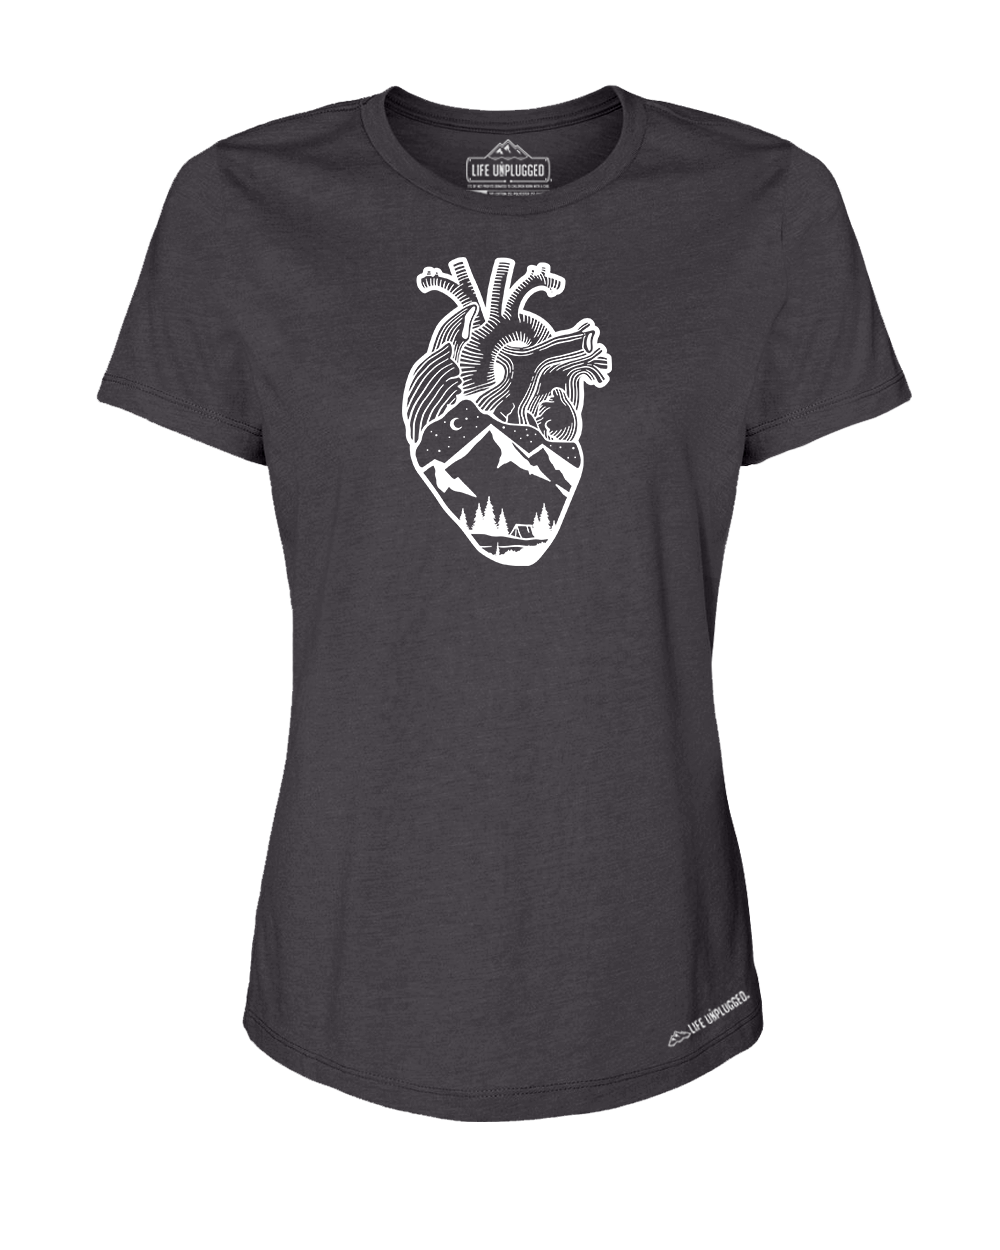 Anatomical Heart (Full Chest) Premium Women's Relaxed Fit Polyblend T-Shirt - Life Unplugged